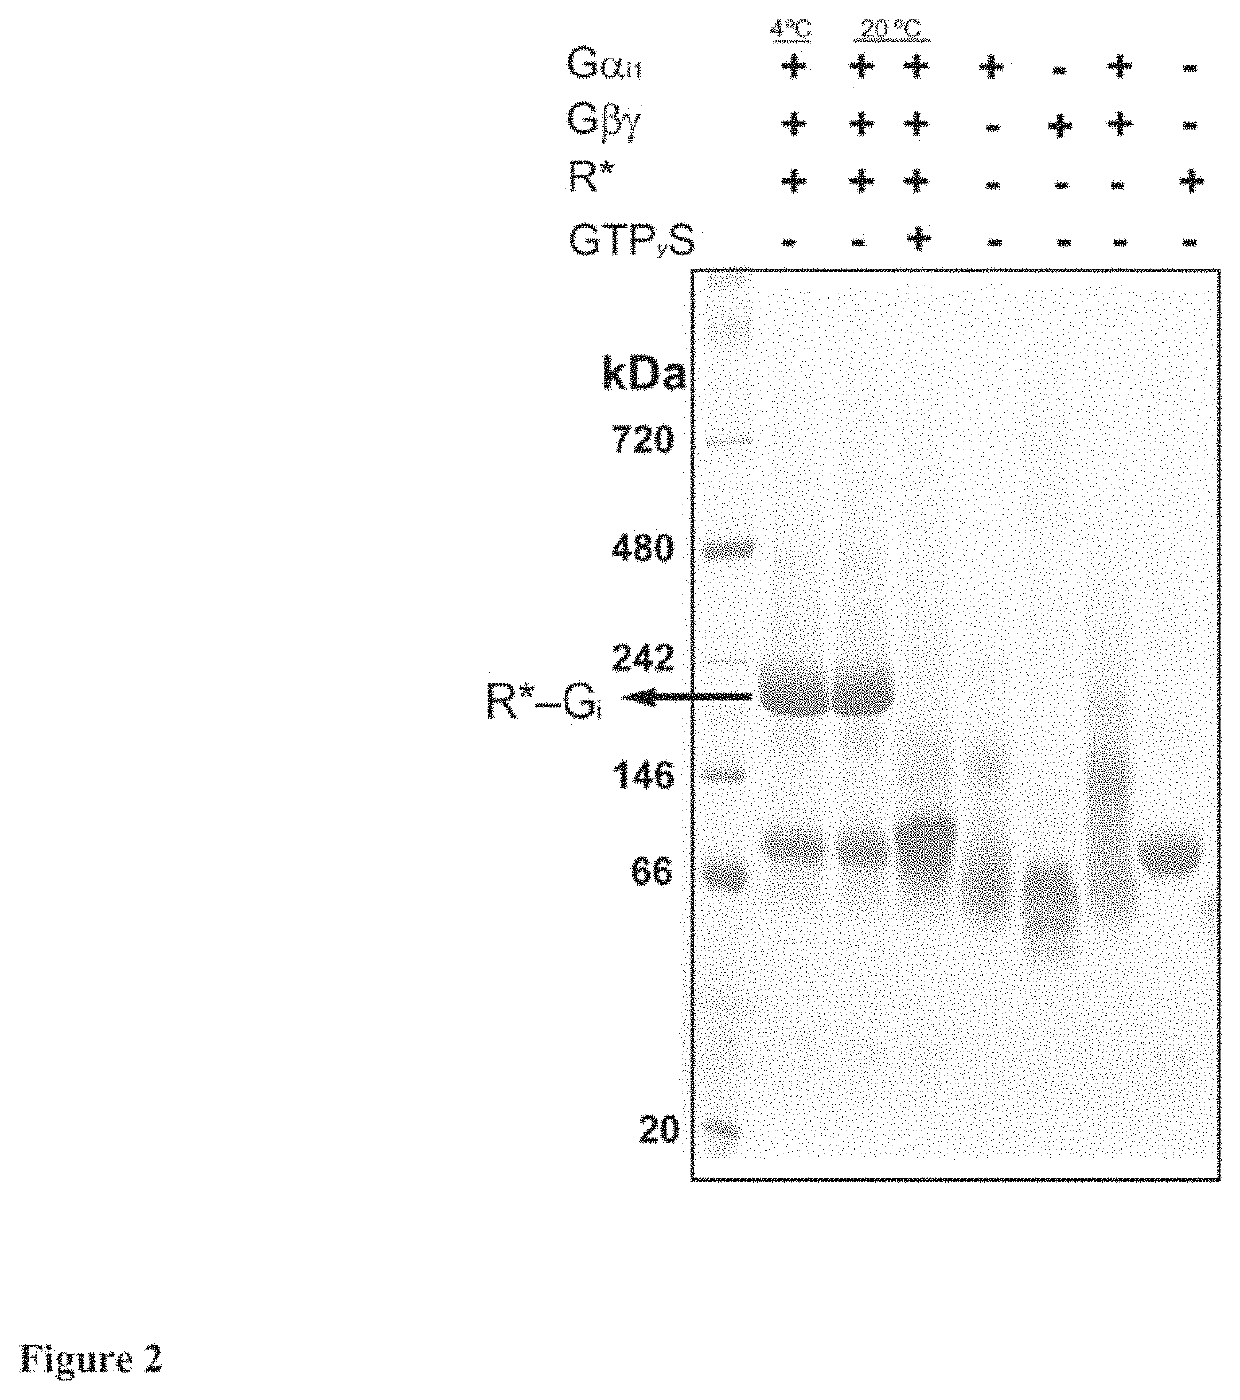 Human G protein alpha subunit gail with at least one mutated amino acid residue